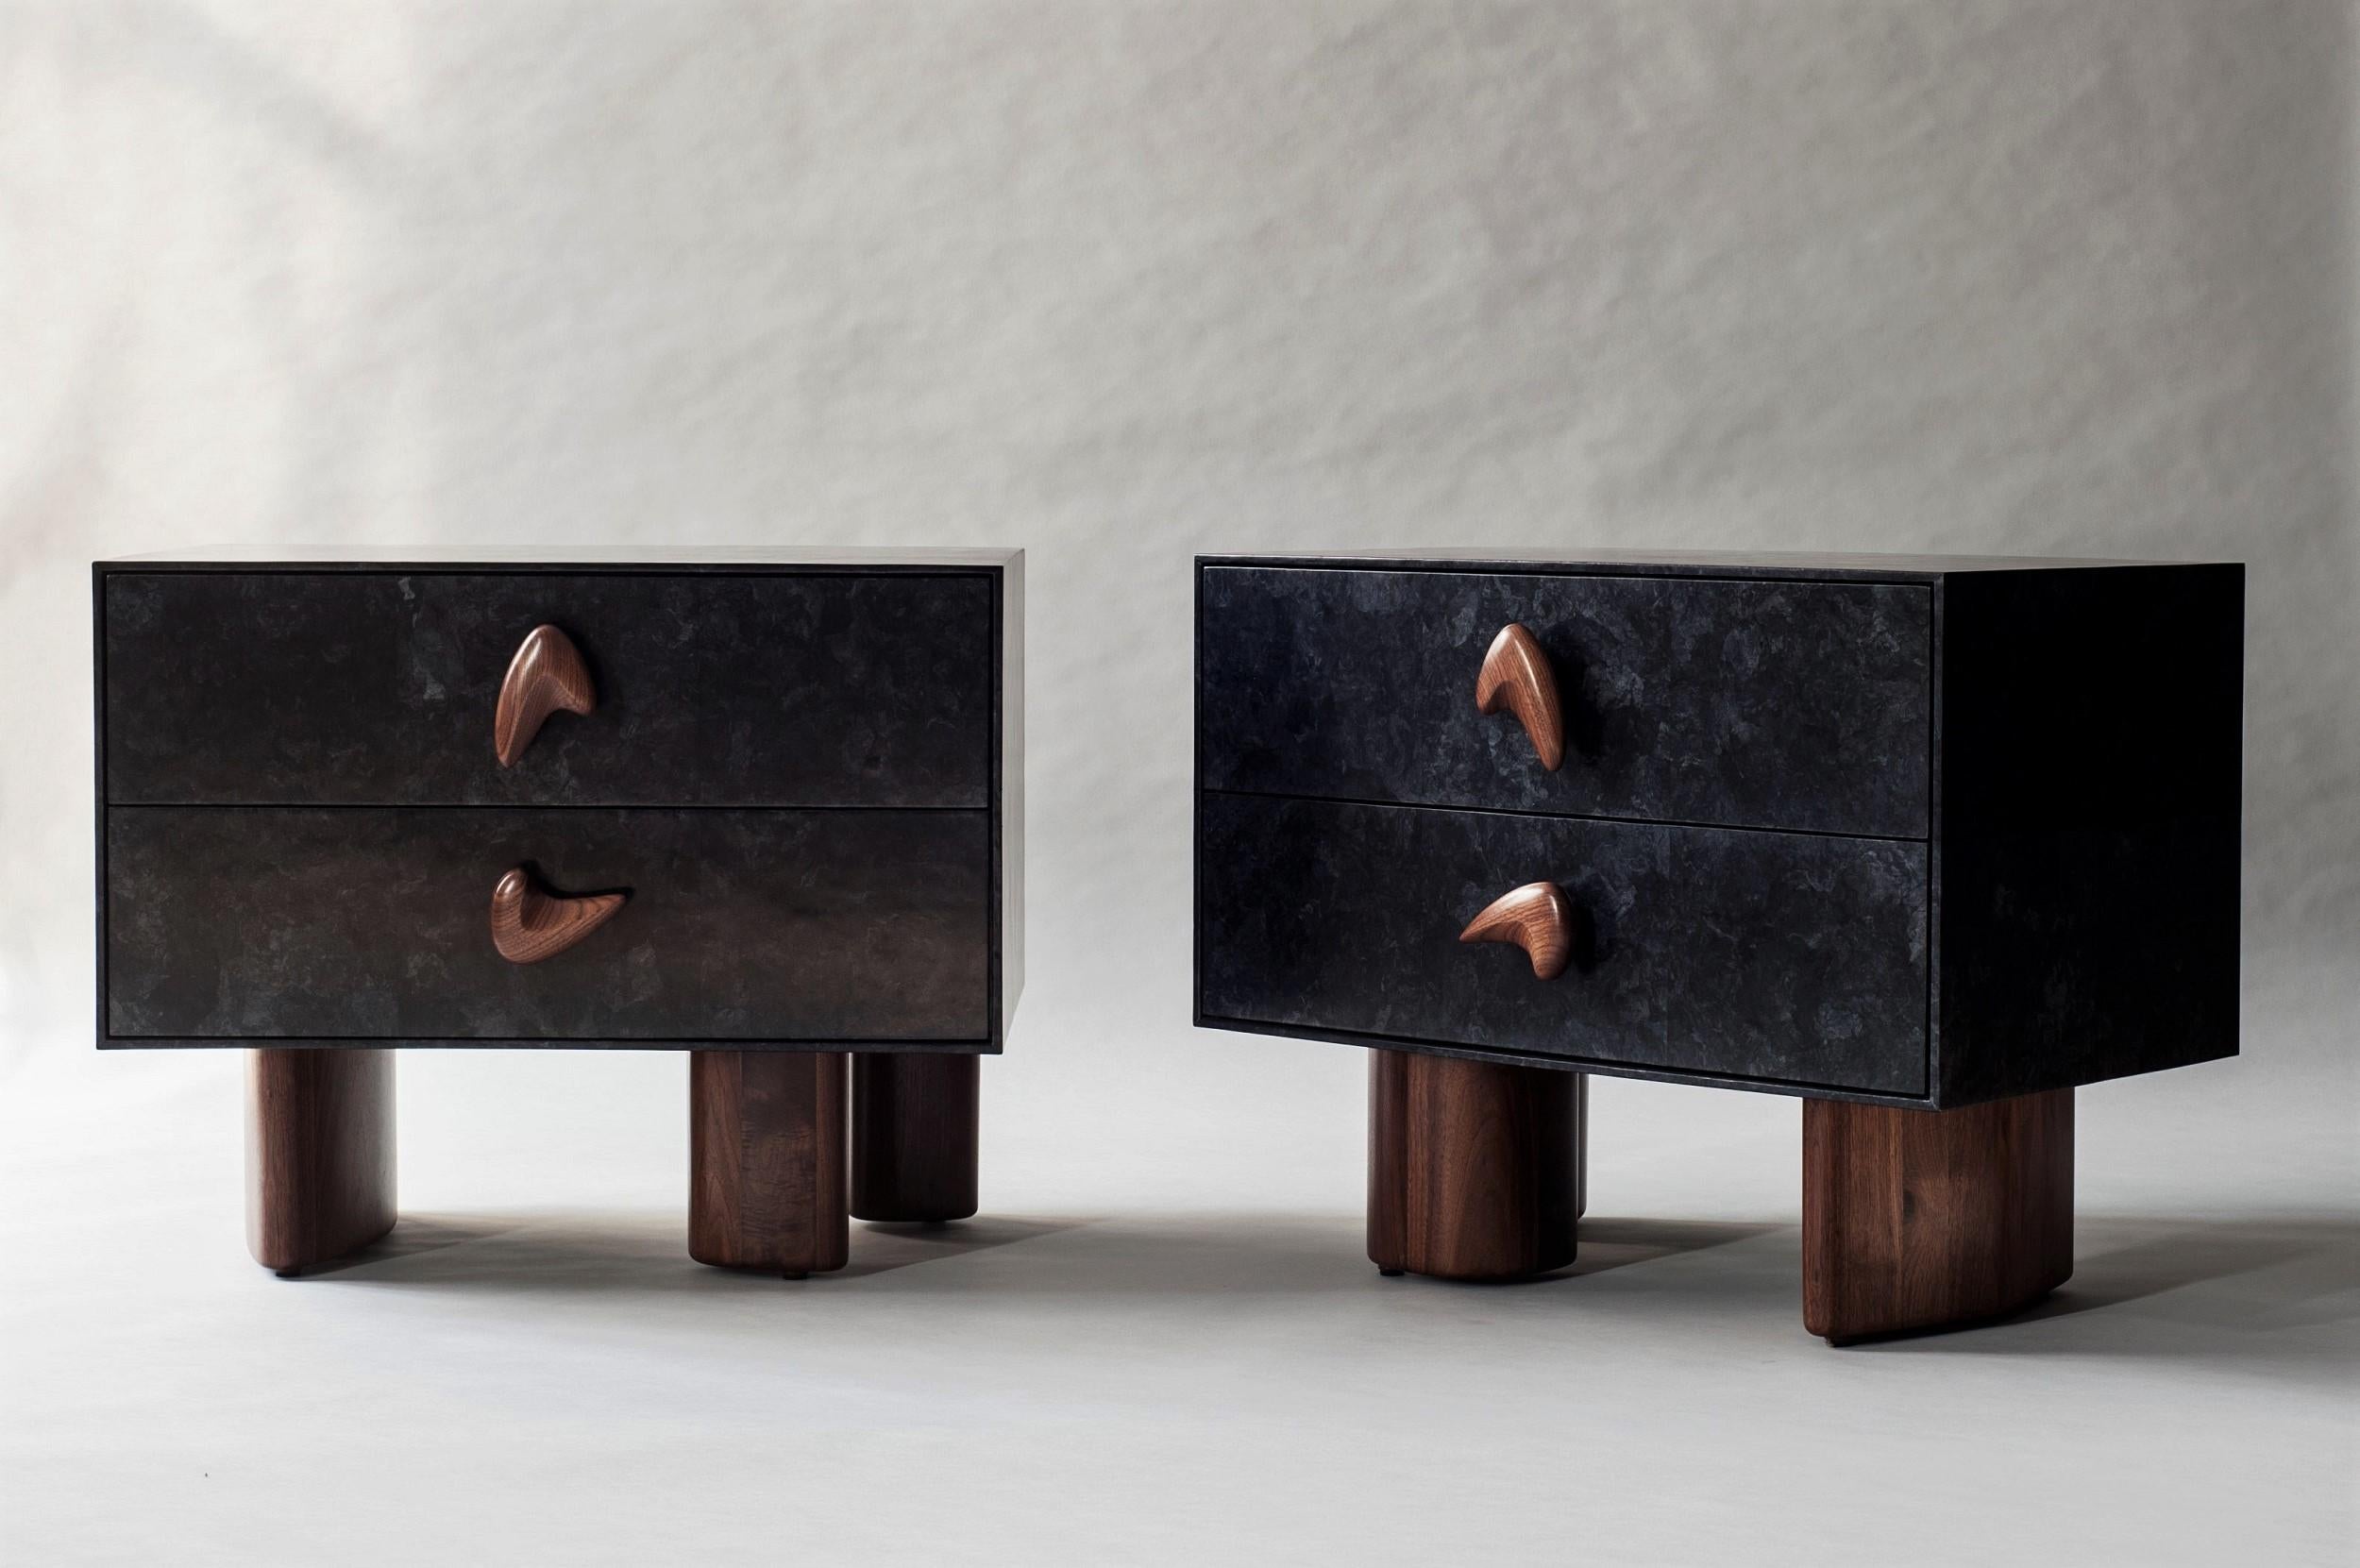 Inspired by the graphic motifs of Le Corbusier's mural paintings, the solid form of the Corbu bedside table is defined by rhythmically placed handles. Architectural legs lend support and an unexpected element of asymmetry. 

- Sculptural tables